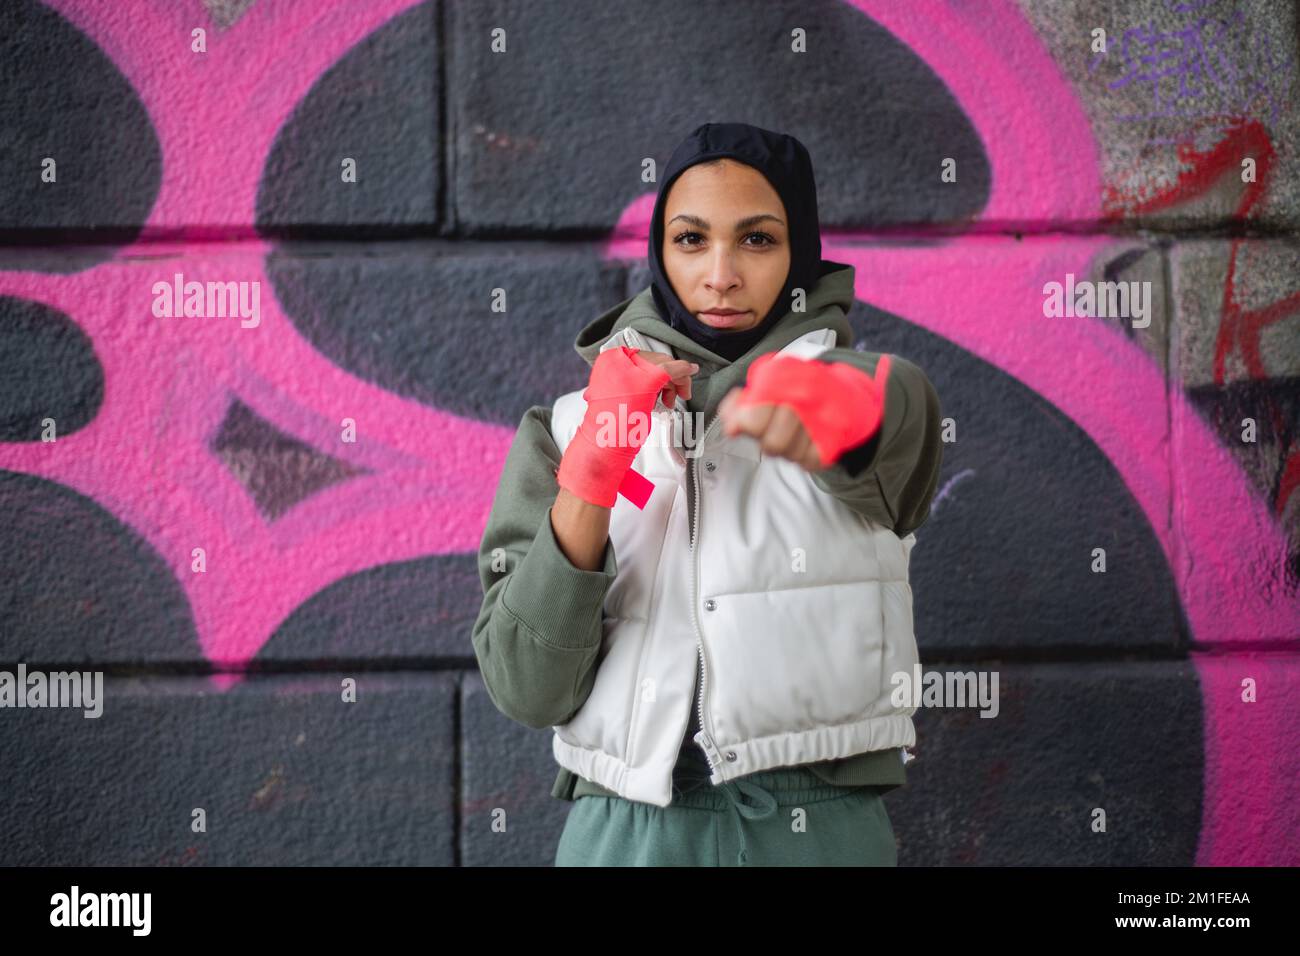 Portrait of young muslim woman with sports gloves, standing in front of graffiti. Stock Photo